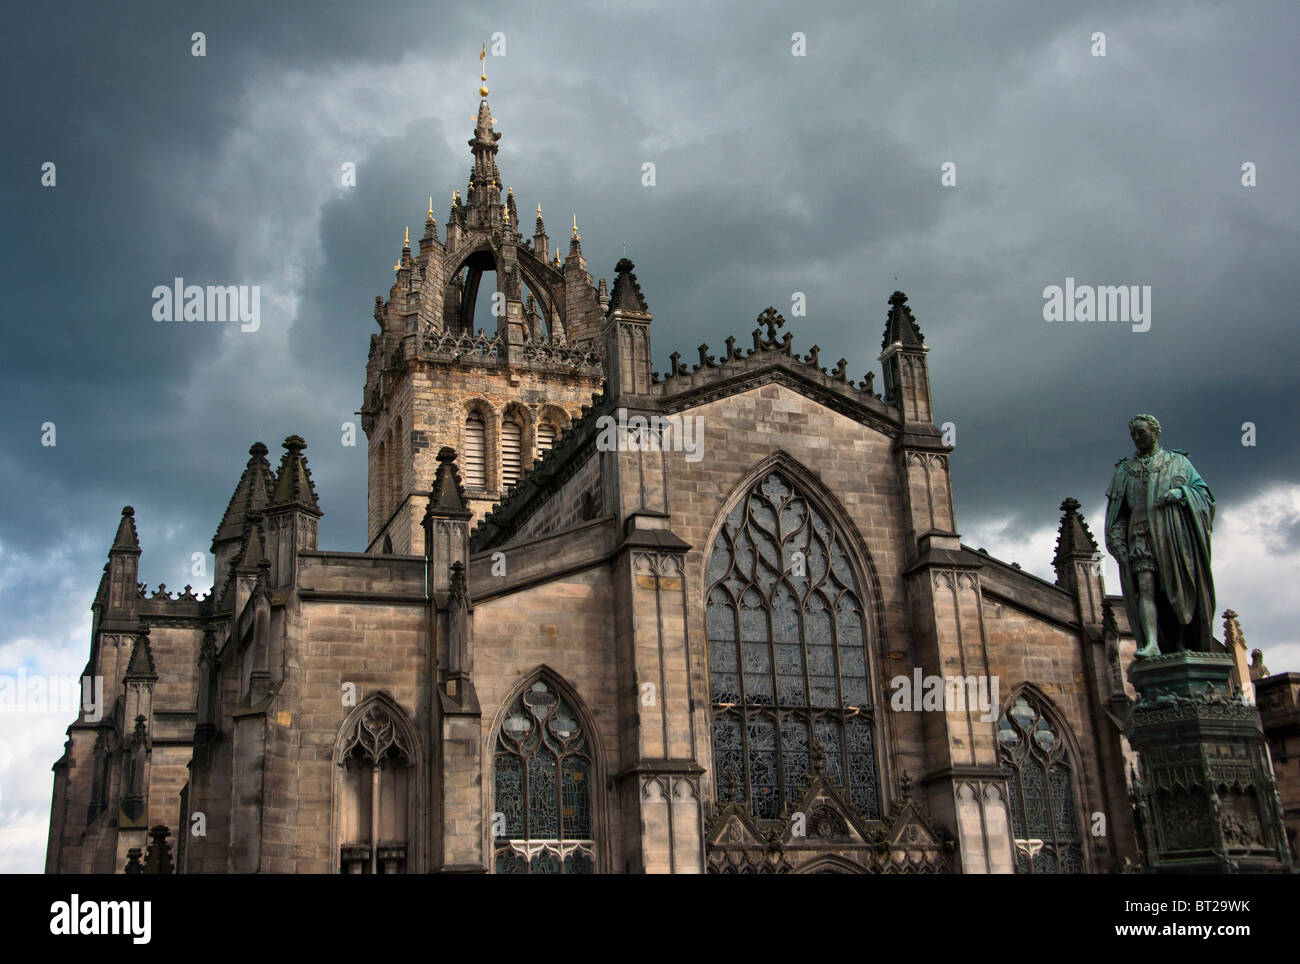 St Giles Cathedral under a stormy sky with a statue of economist  Adam Smith , Royal Mile, Edinburgh, Scotland. Stock Photo